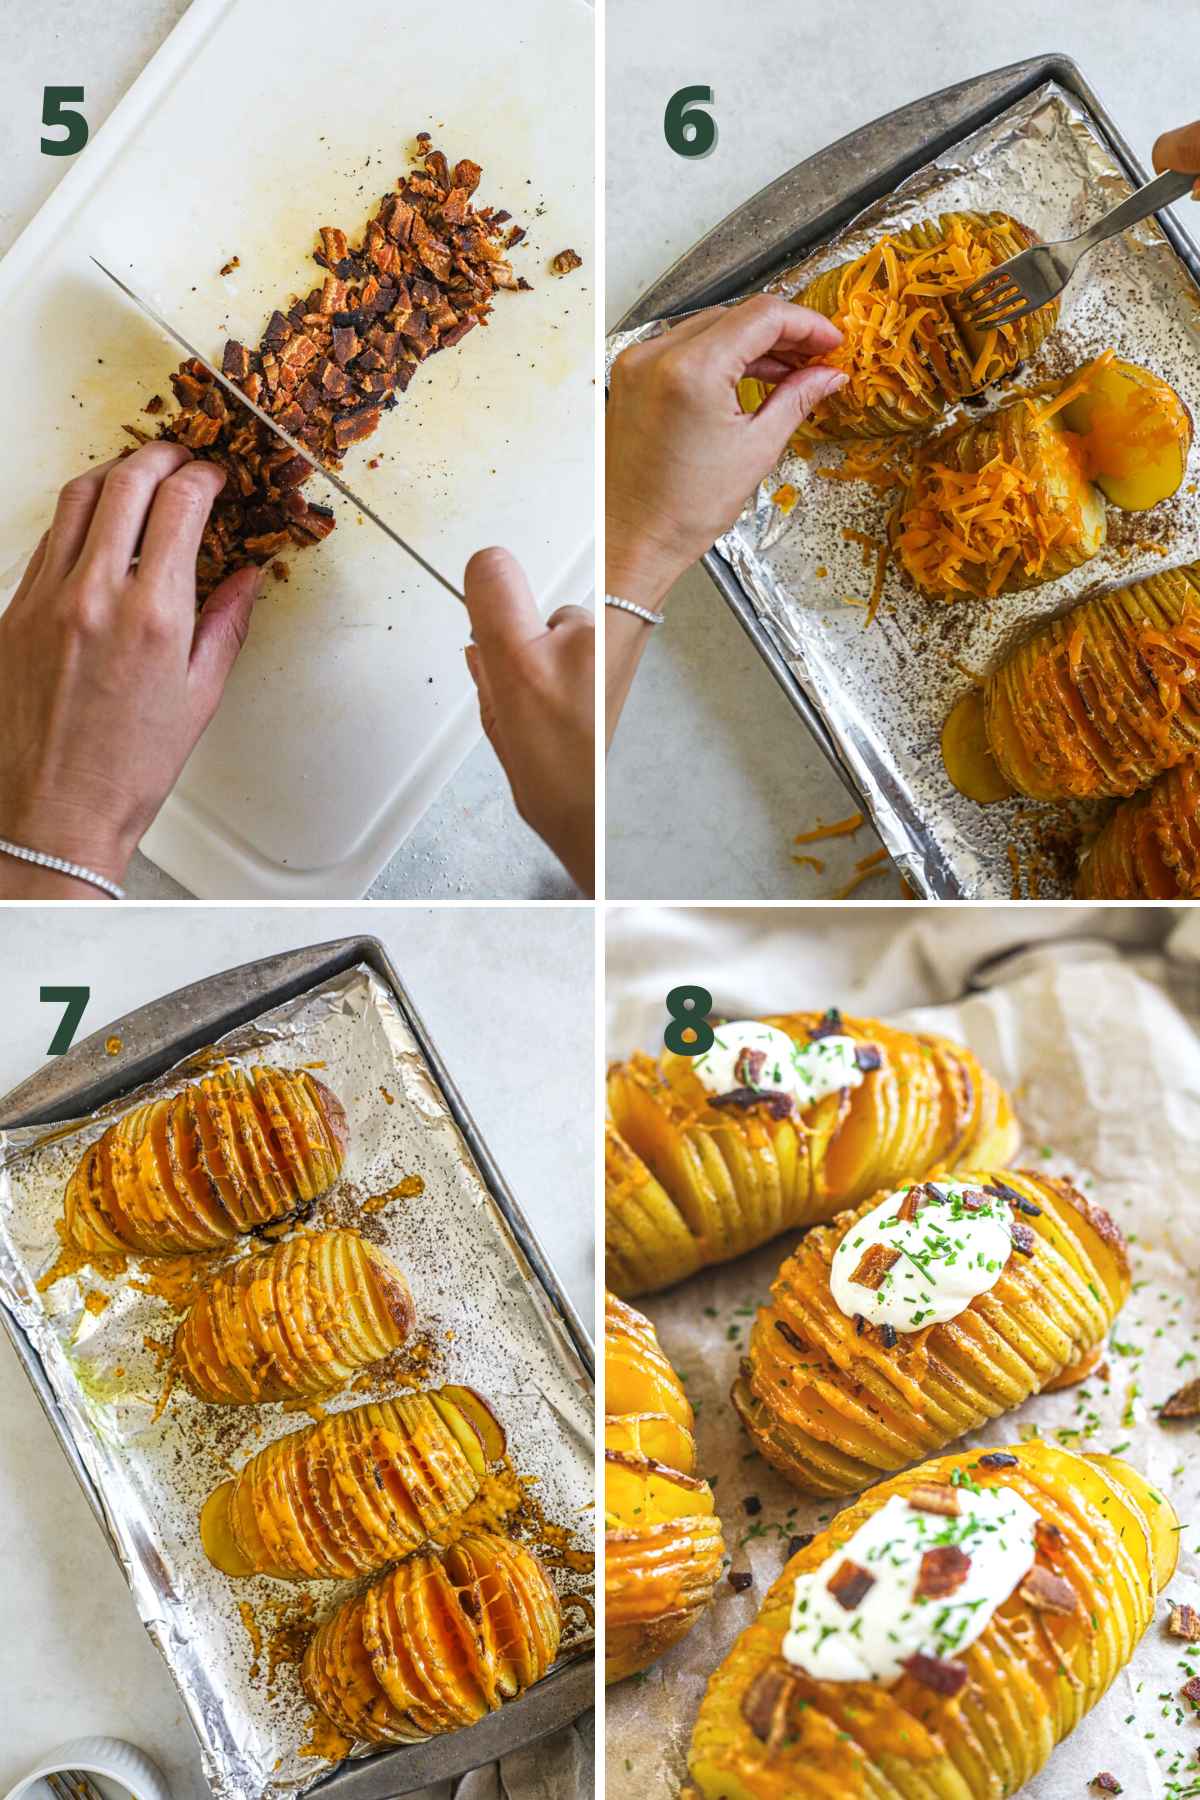 Steps to make bacon cheddar hasselback potatoes; chop bacon; add cheese in the folds of the potatoes and bake; top with sour cream, chives, bacon.